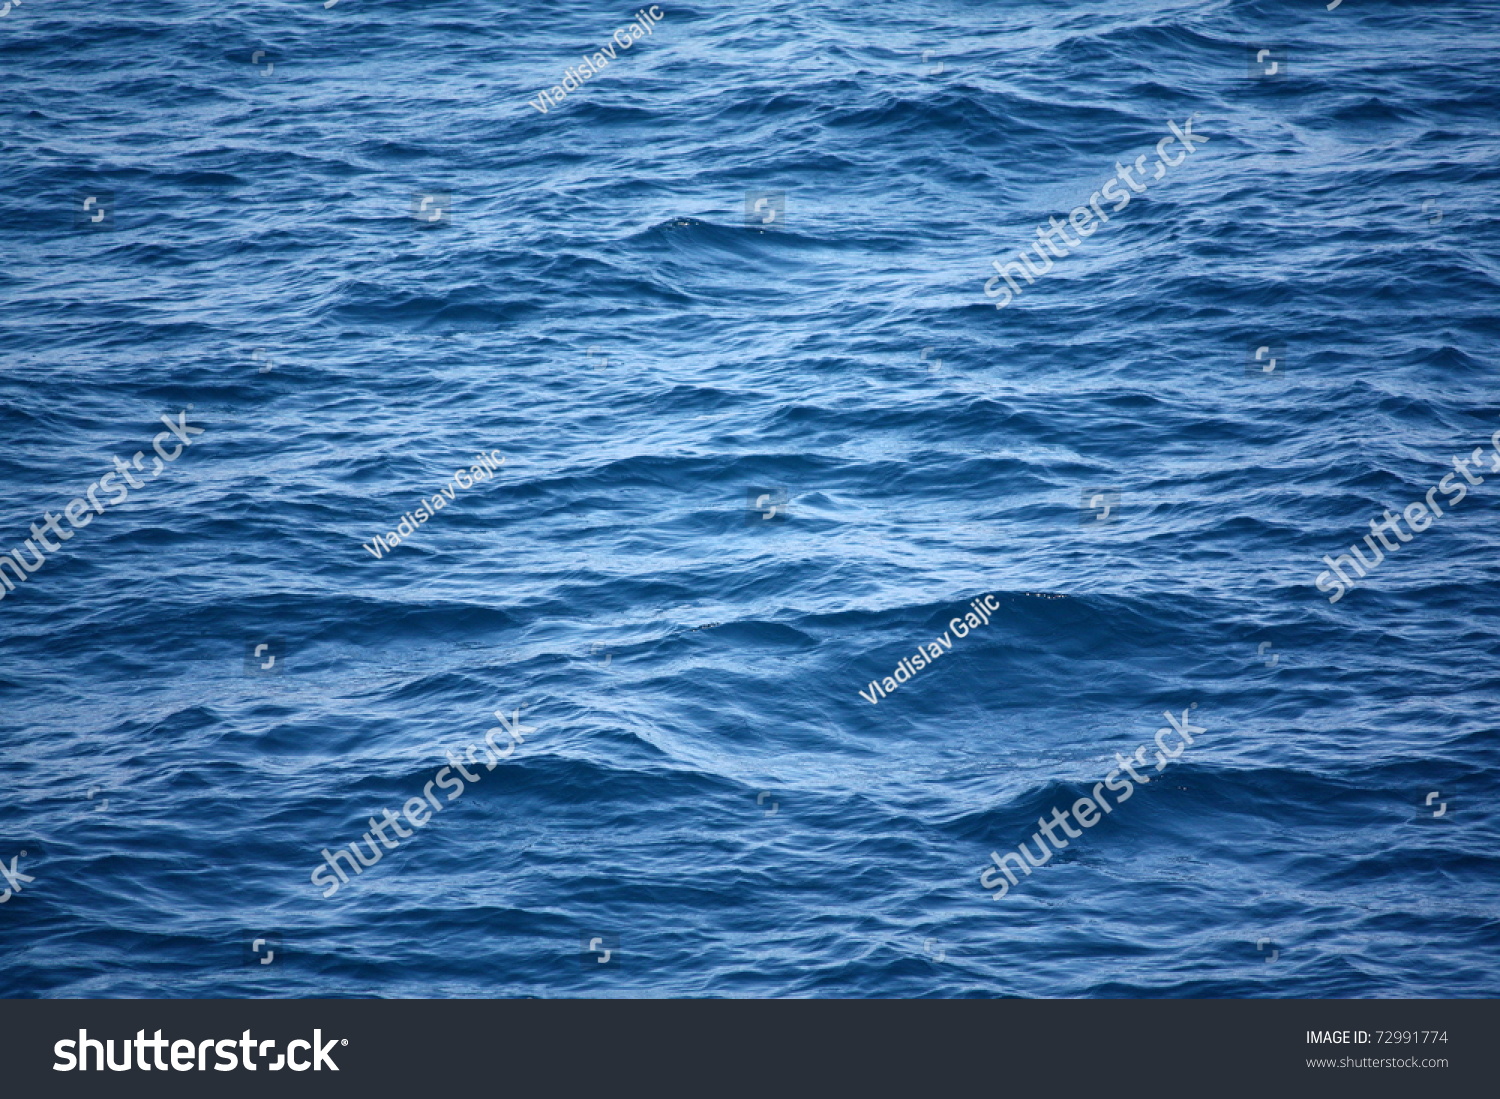 sea water surface #72991774